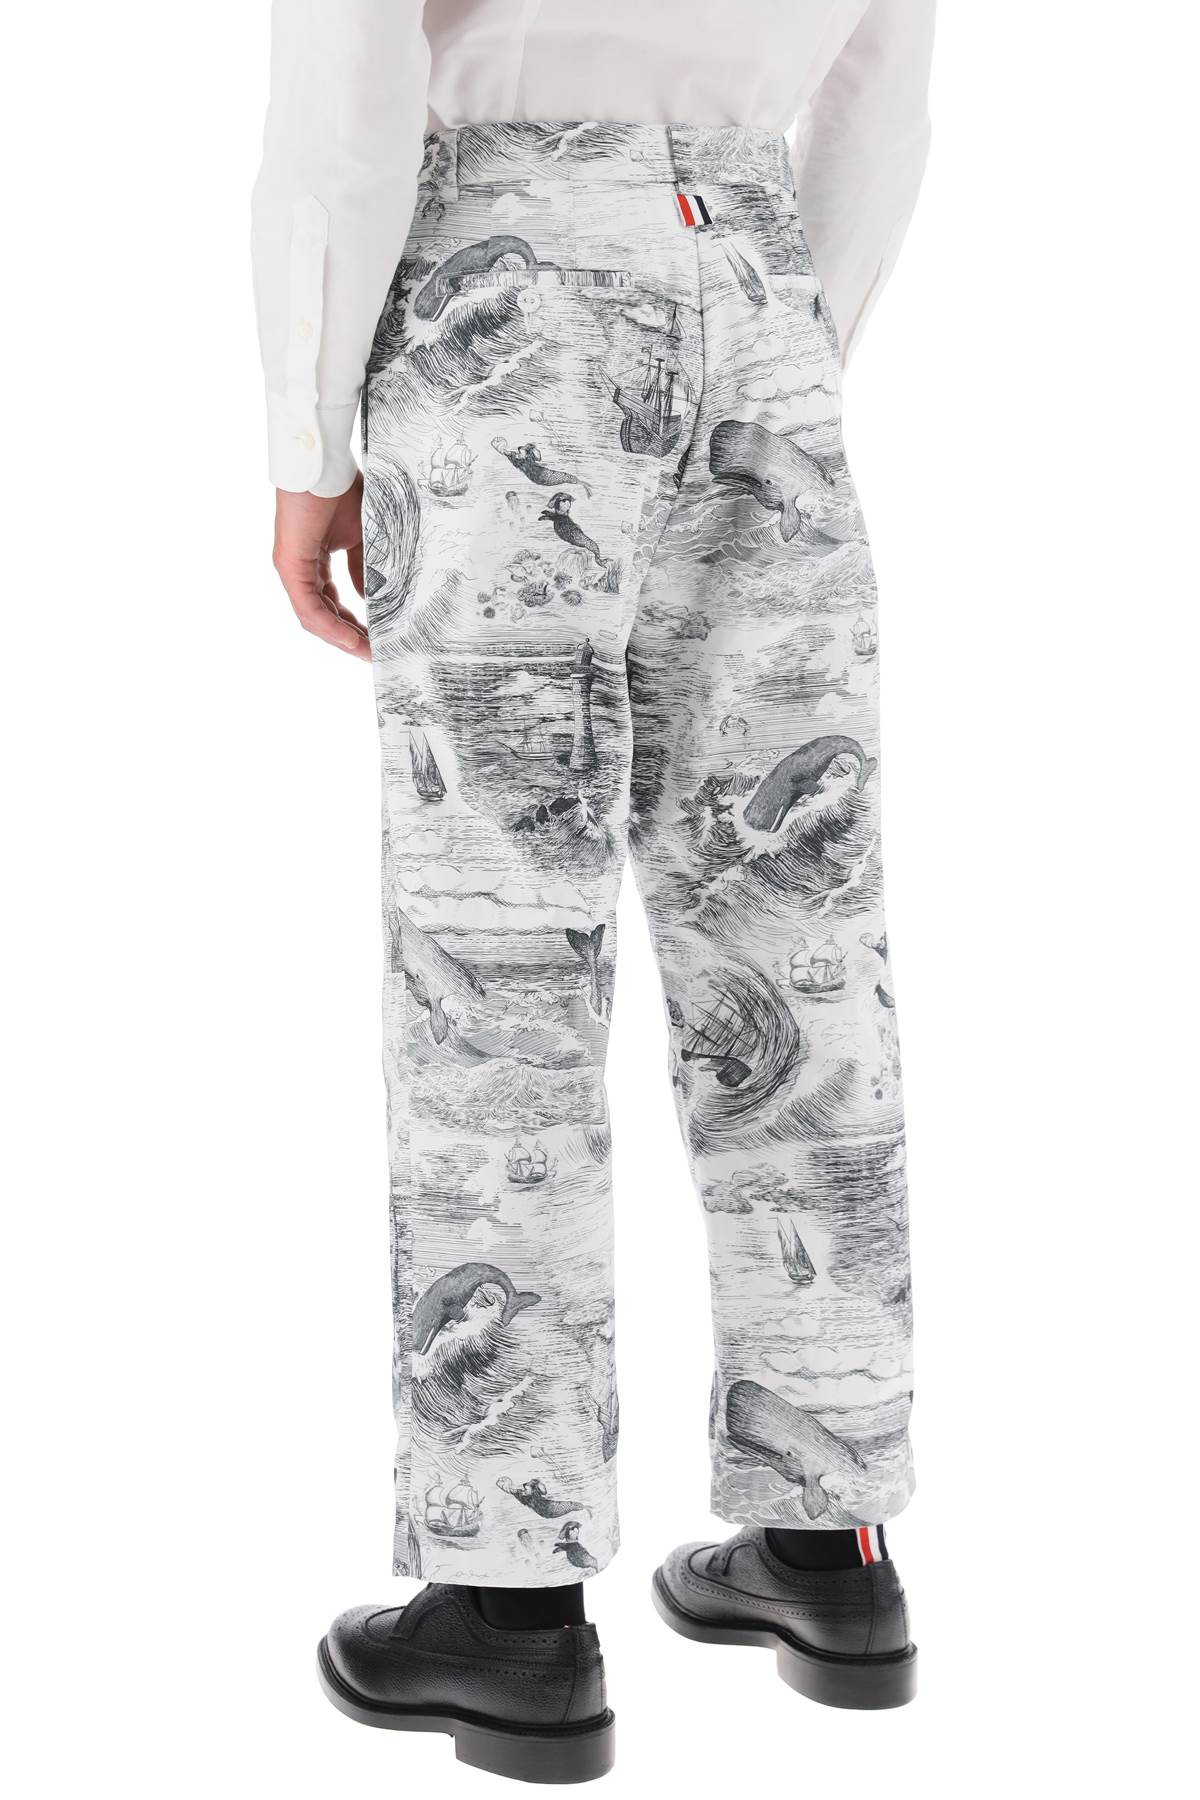 Thom browne cropped pants with 'nautical toile' motif-2